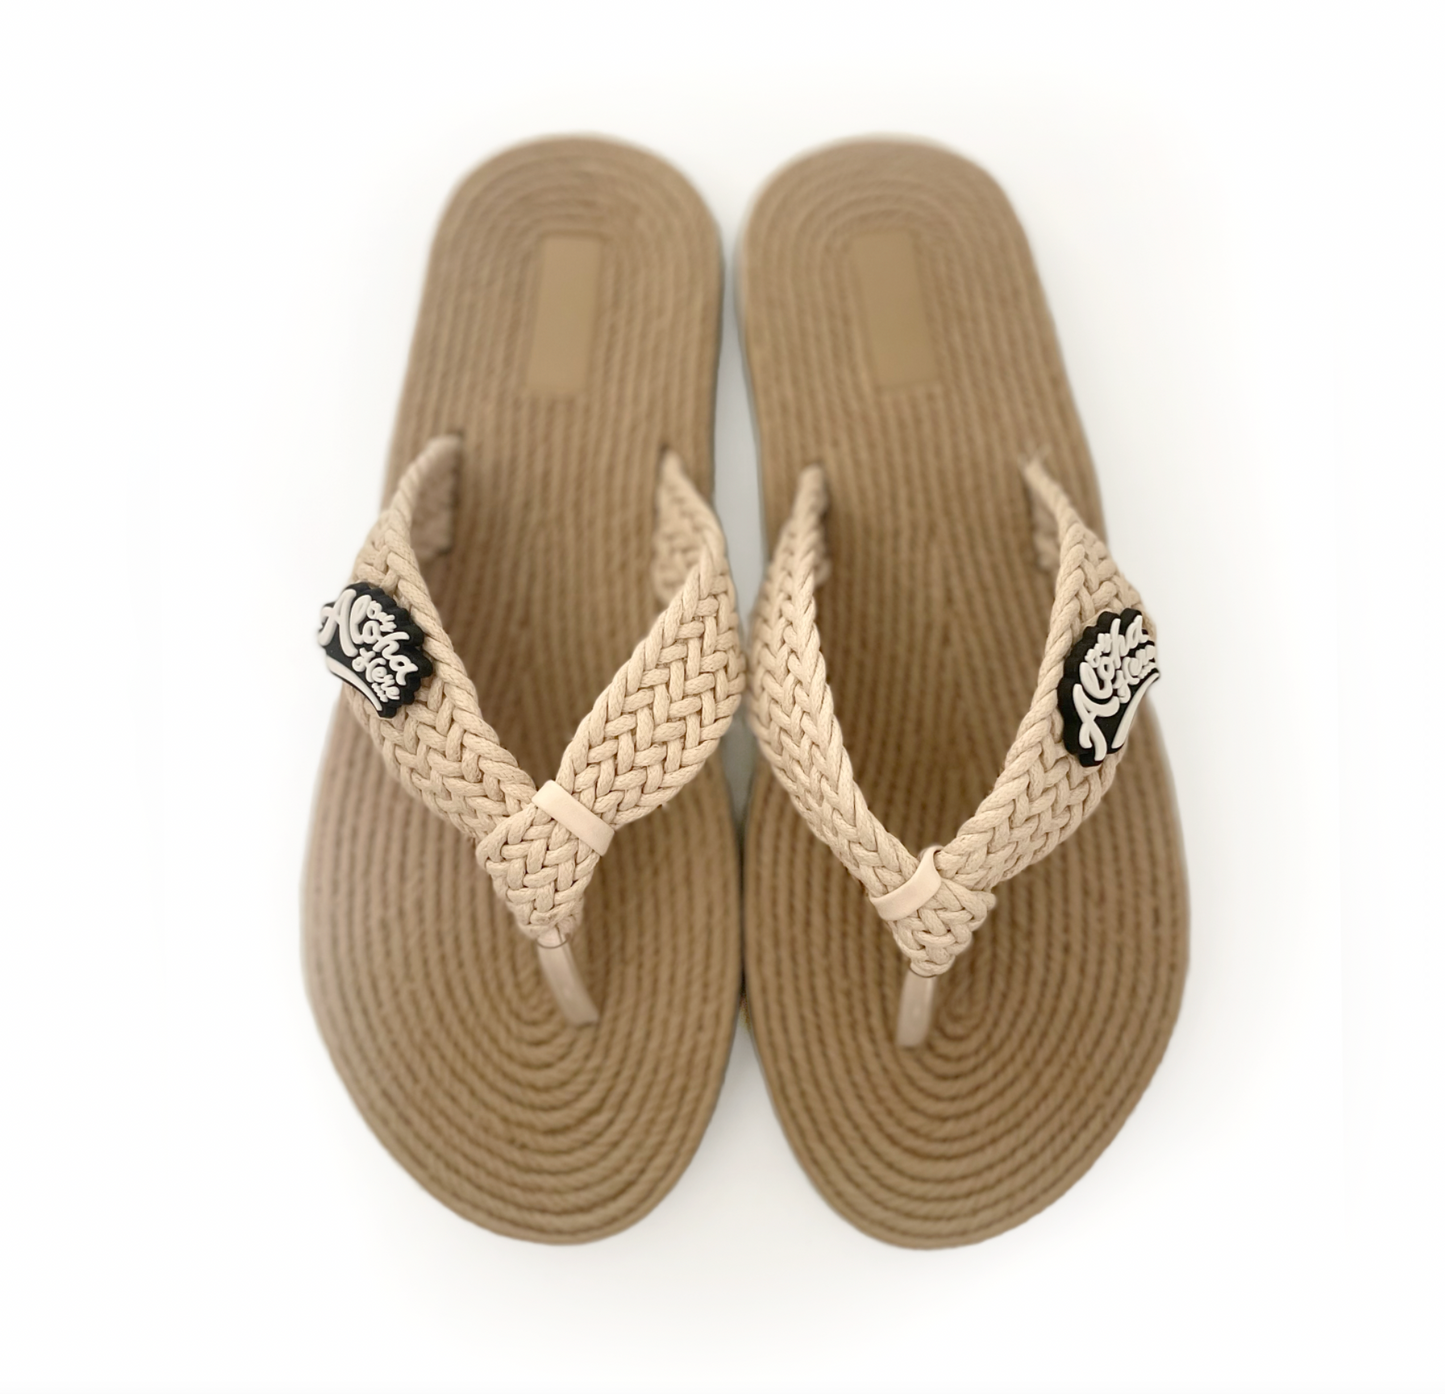 KALIPA - Weave Slippers with Croc Charms